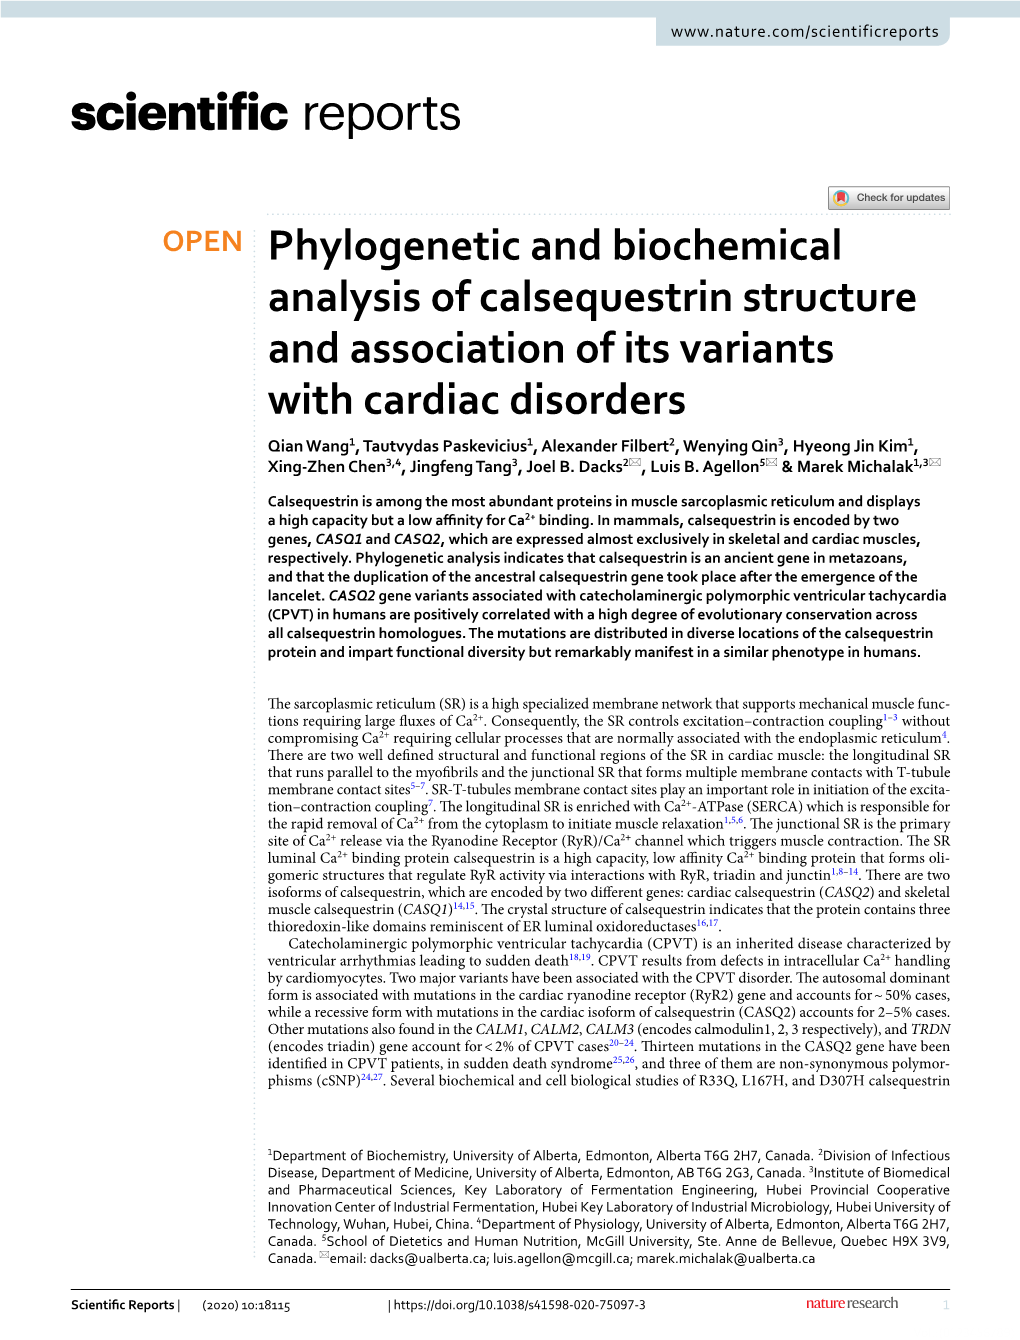 Phylogenetic and Biochemical Analysis of Calsequestrin Structure